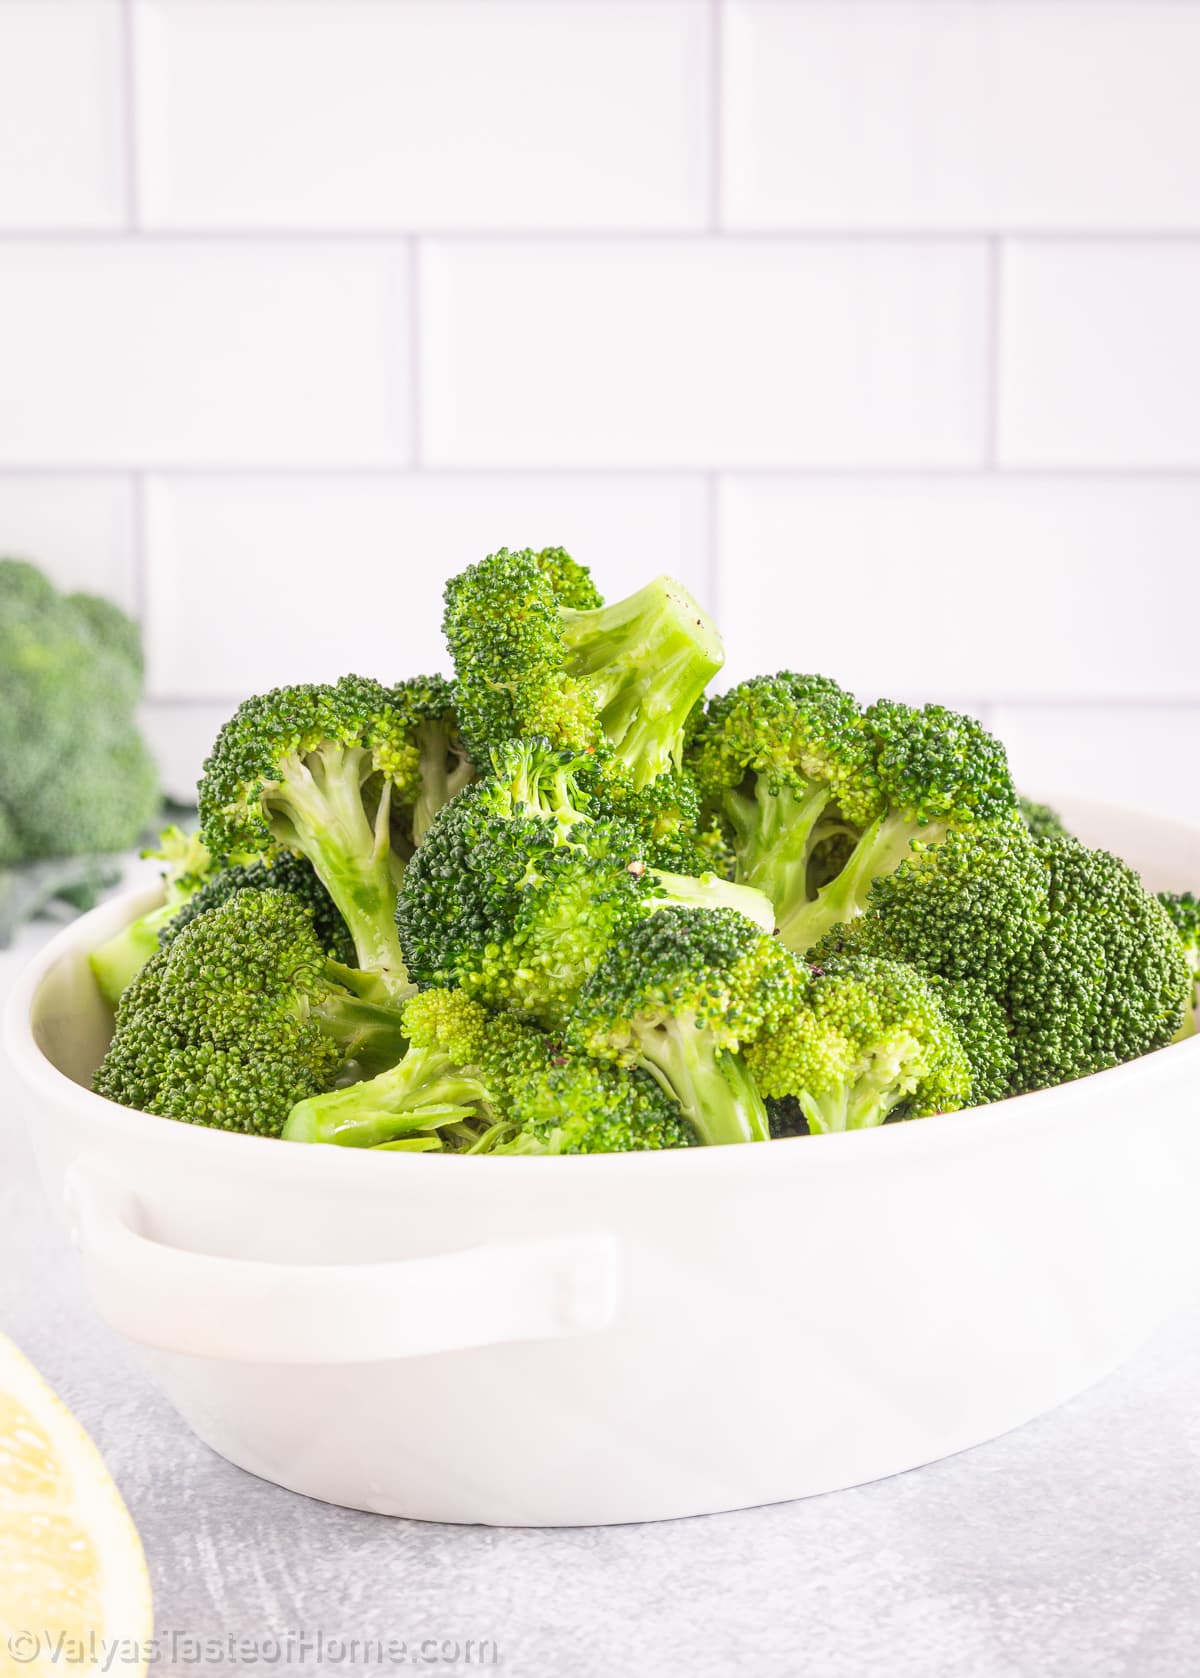 There's something incredibly satisfying about biting into a piece of perfectly steamed broccoli.